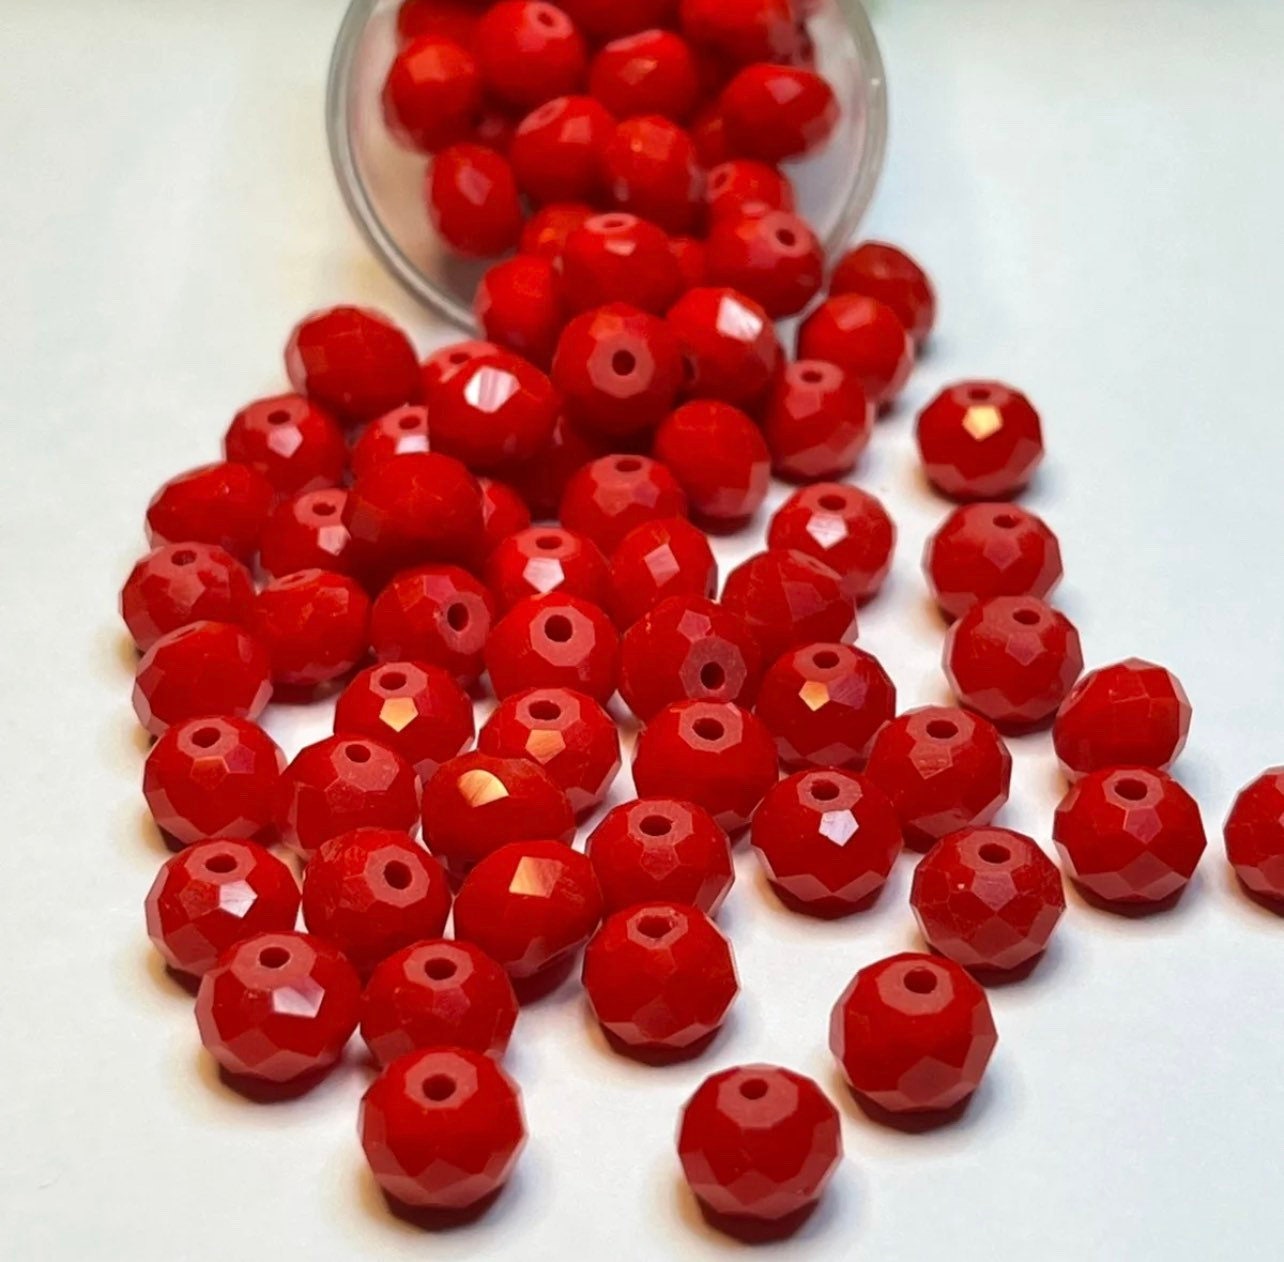 8mm Rondelle Crystal Beads, RED Crystal Beads - Silver Enchantments